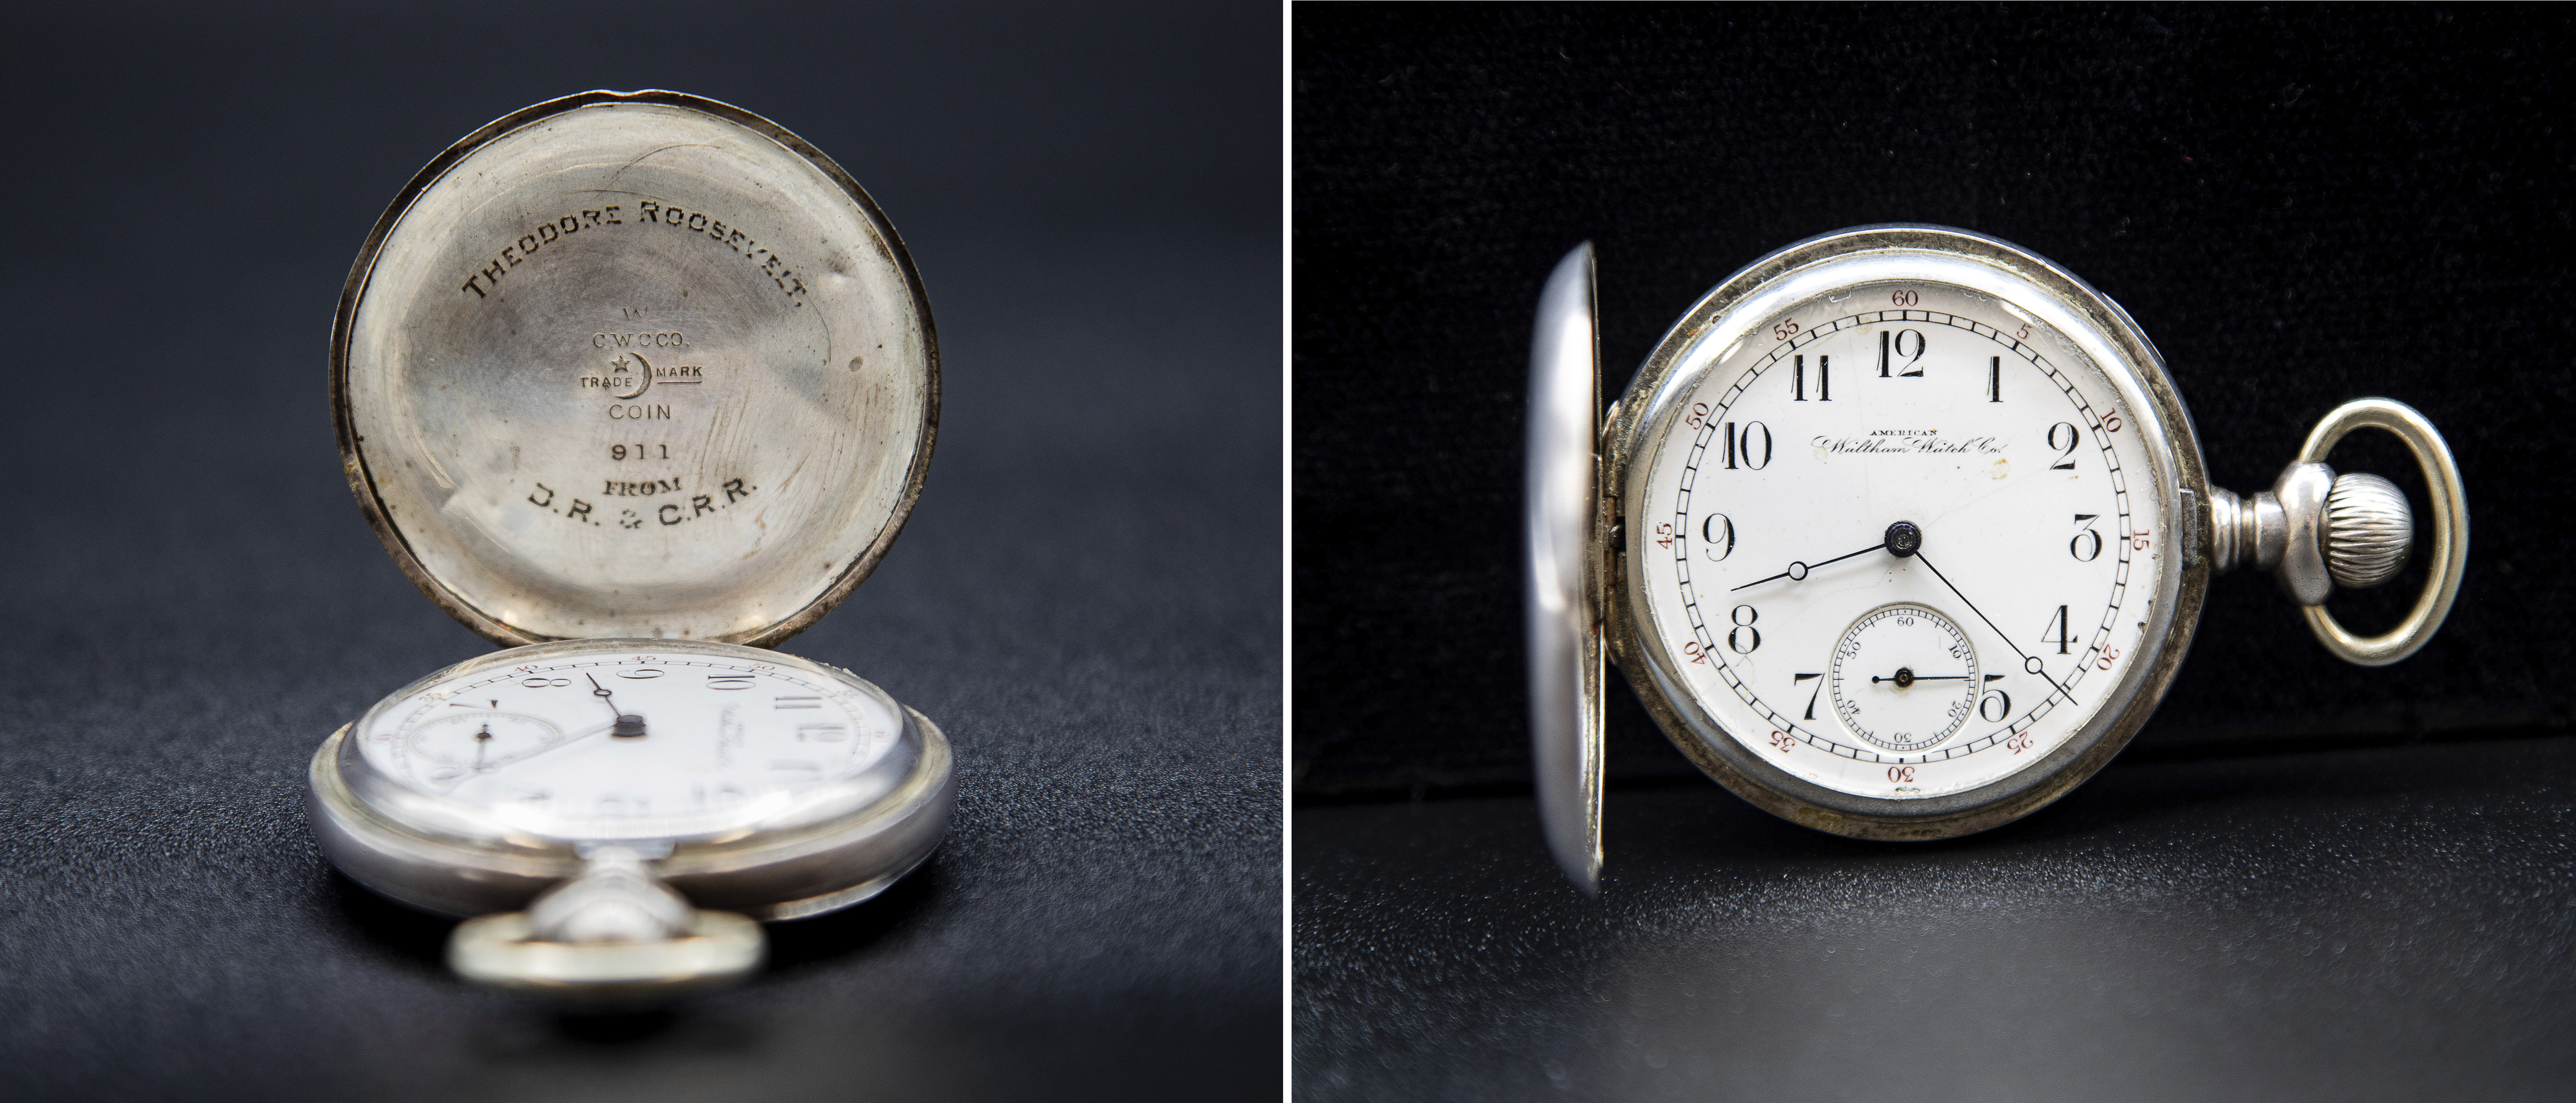 These photos, provided by the National Parks Service, show Theodore Roosevelt's favorite pocket watch that was stolen in July 1987 while on display in Buffalo, NY. The watch turned up at an auction house and was returned this week to the Sagamore Hill national historic site in New York. (Jason Wickersty/National Park Service via AP)